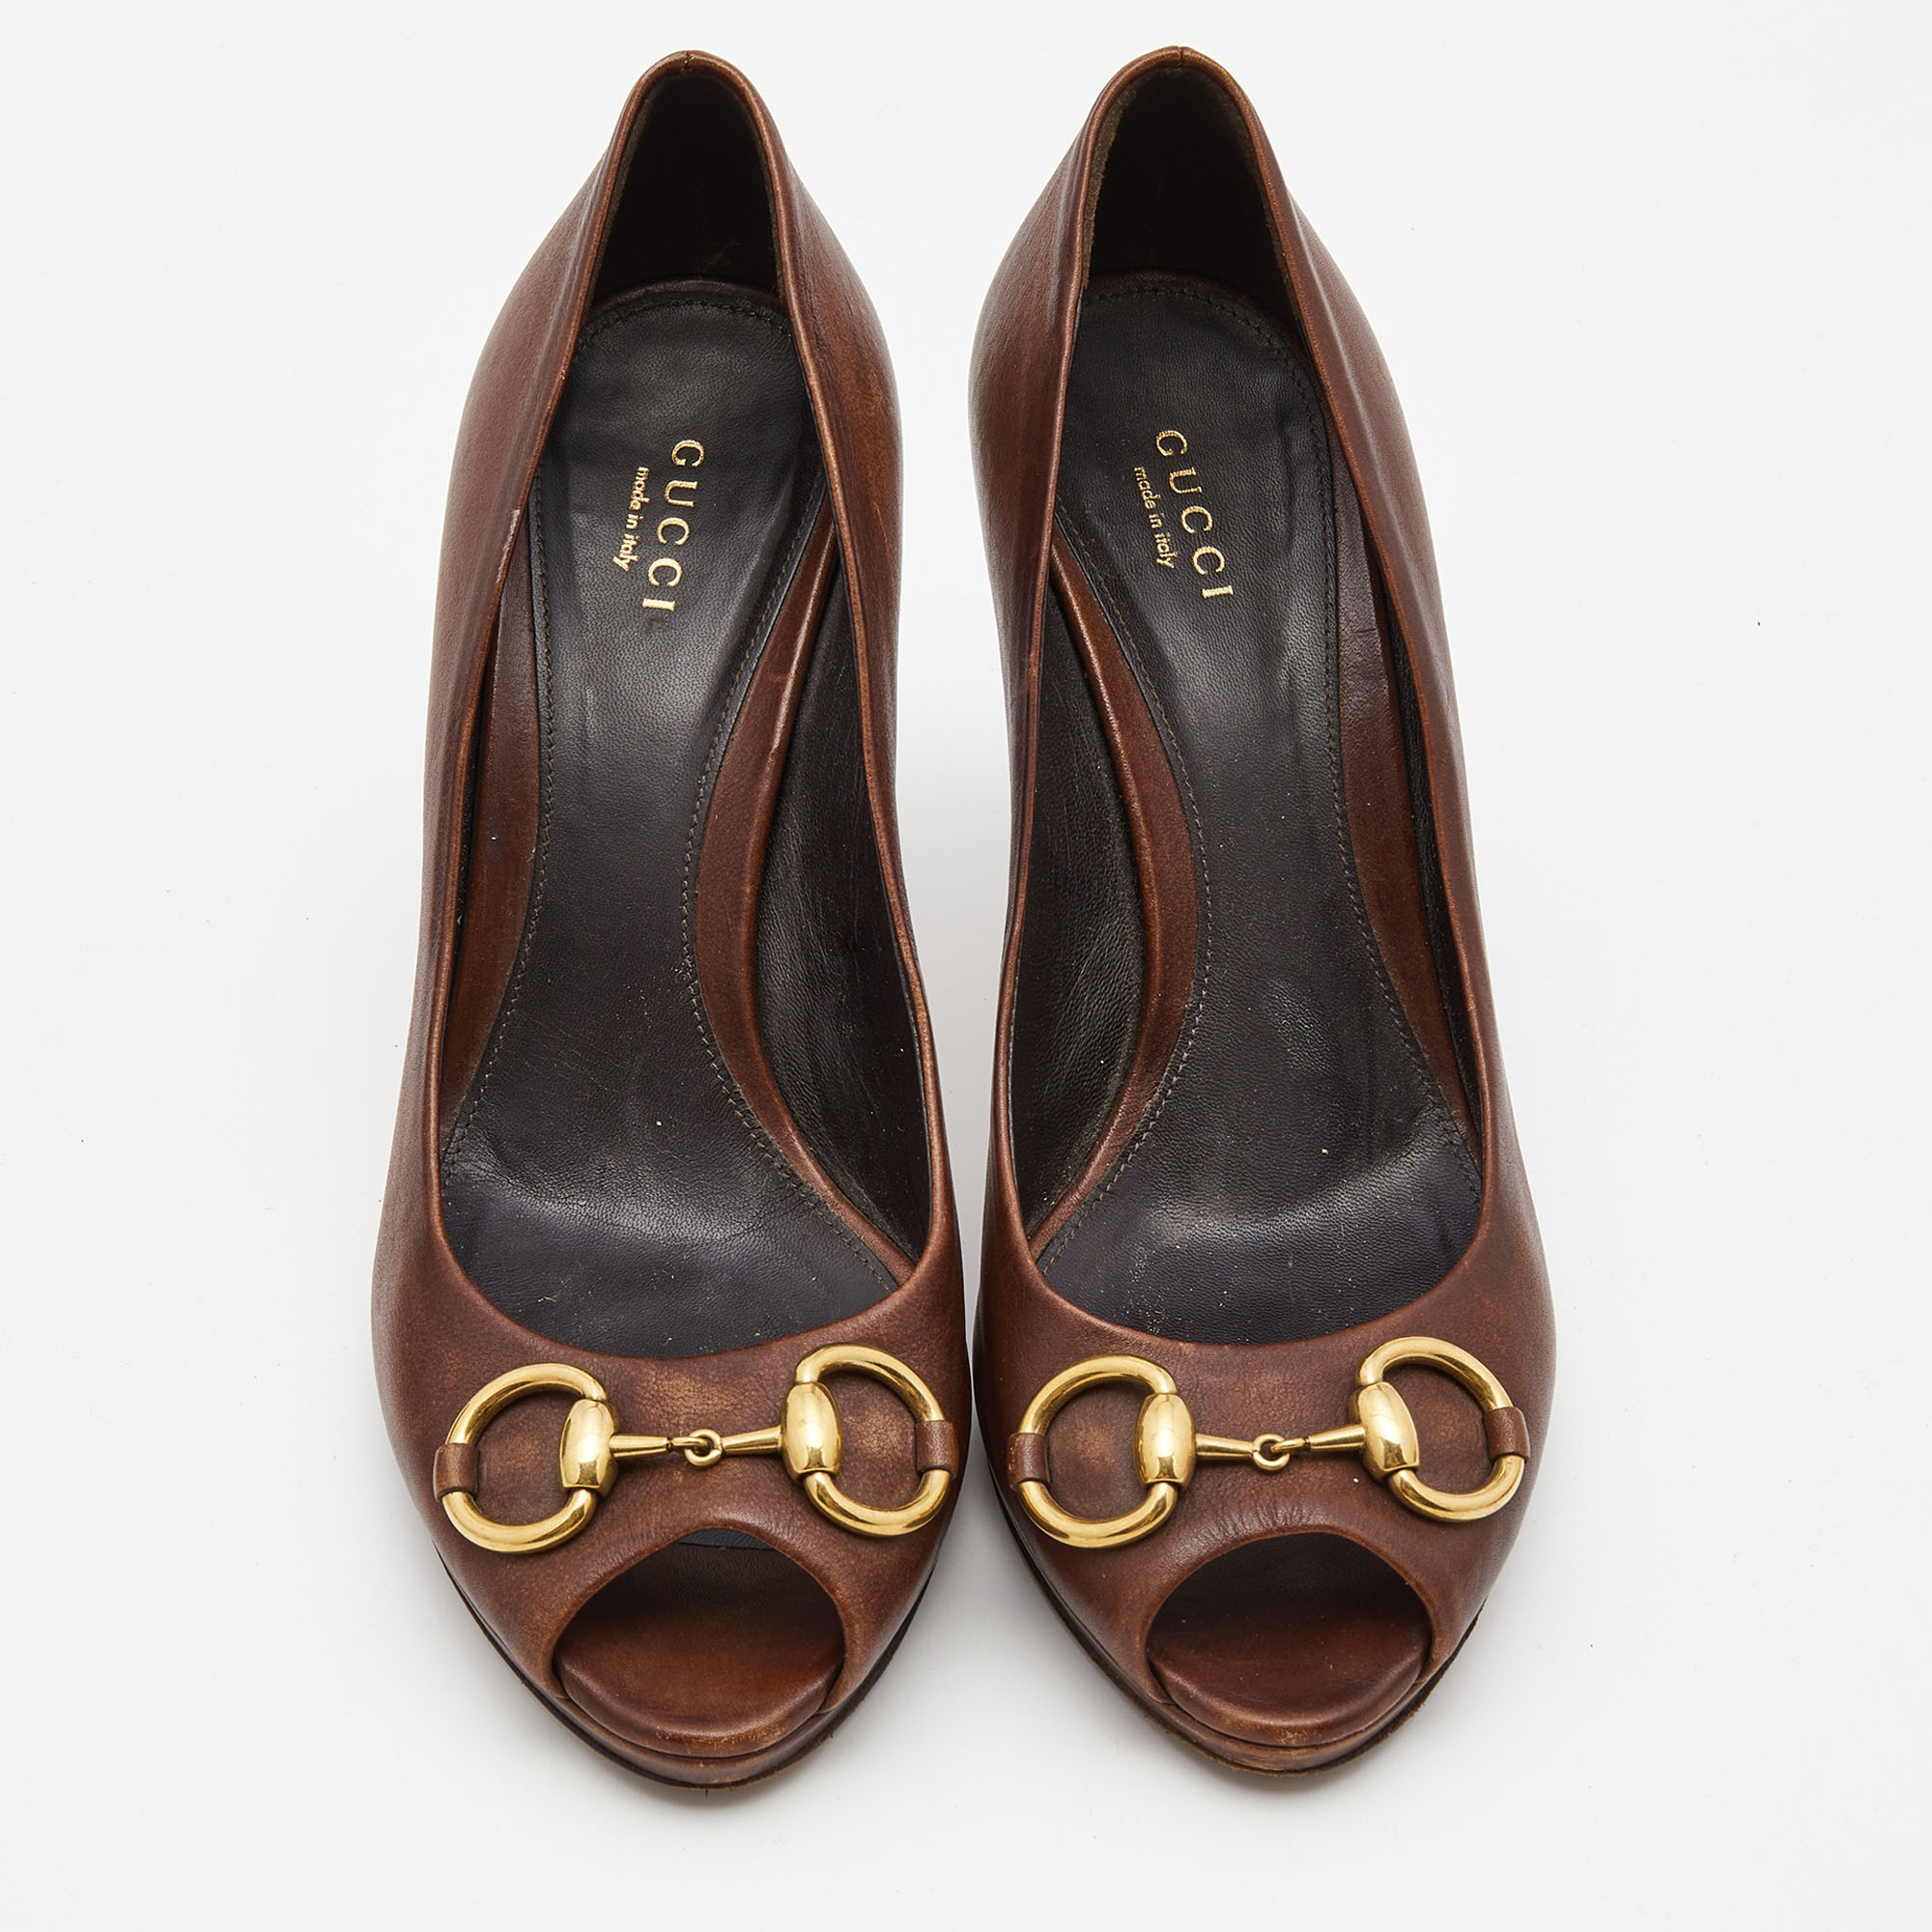 Gucci Brown Leather Hollywood Peep Toe Pumps Size 39